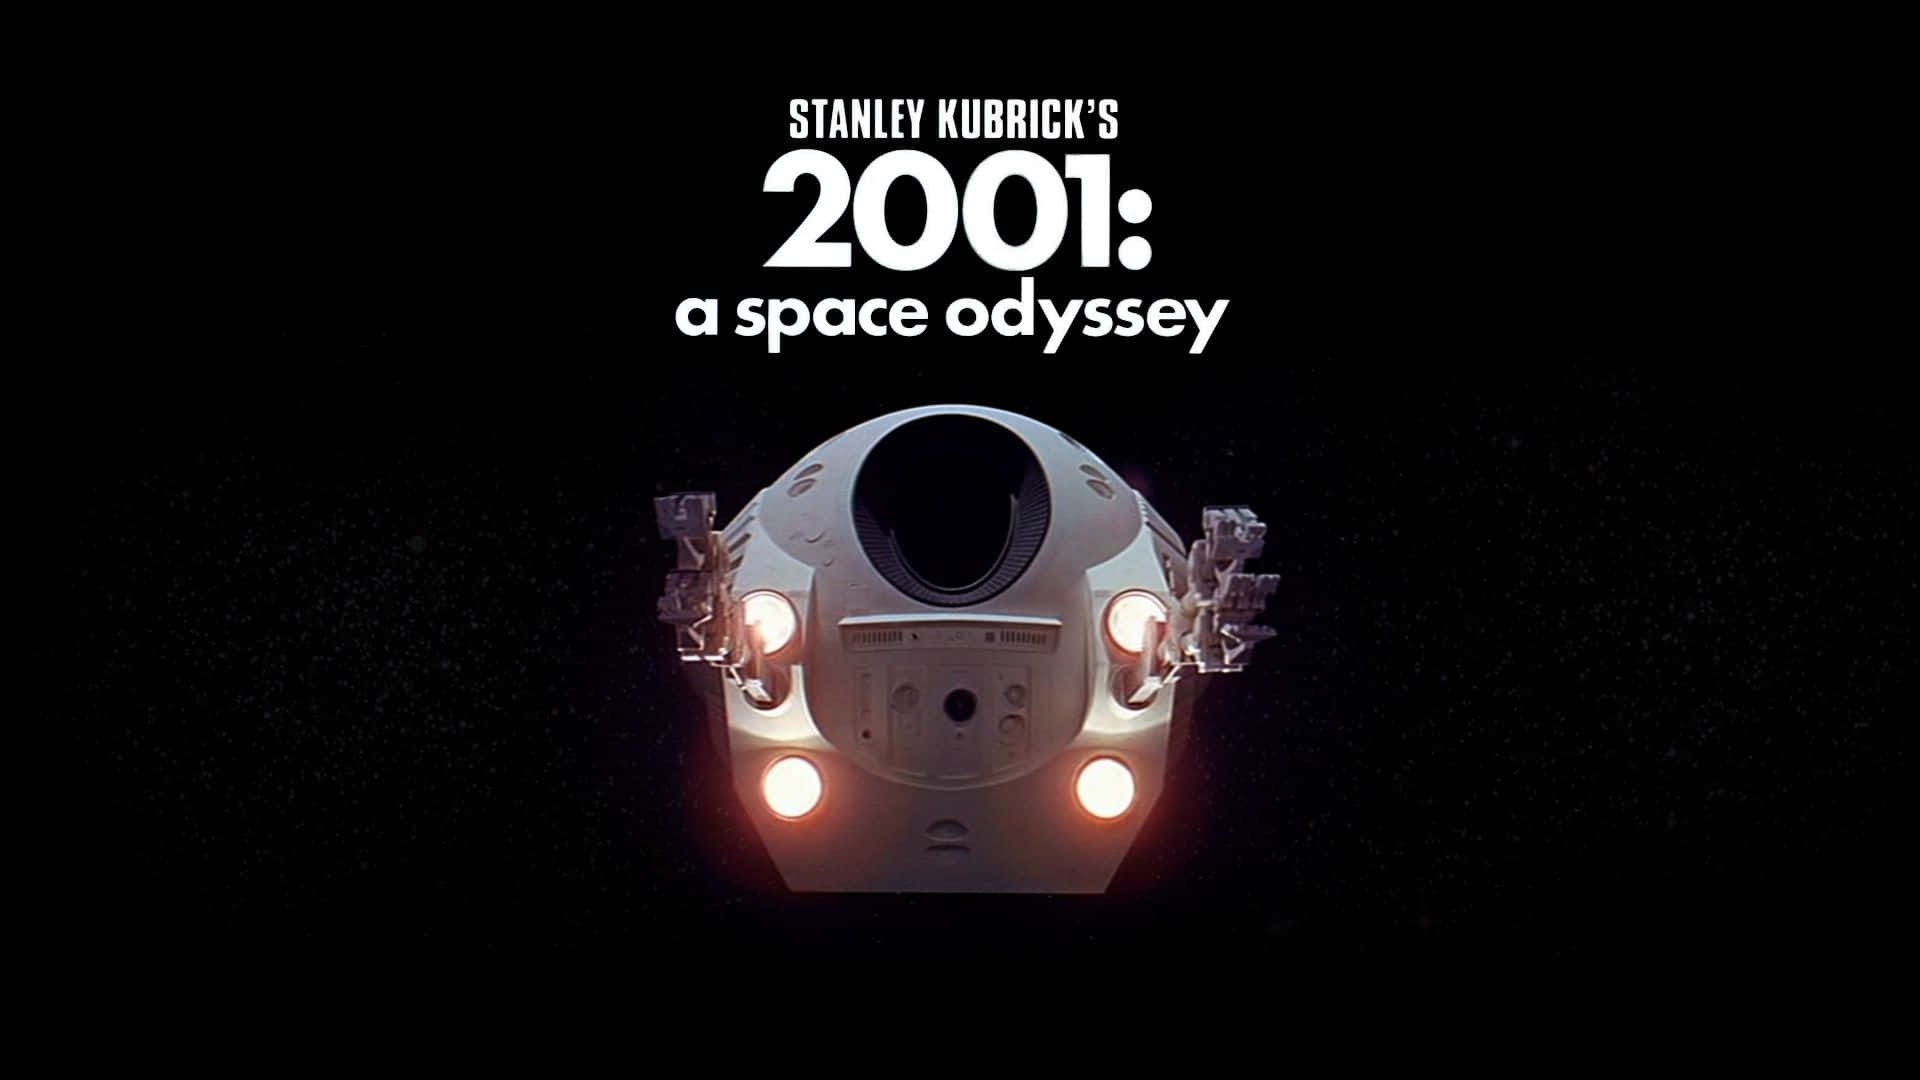 “2001: A Space Odyssey” Wallpaper